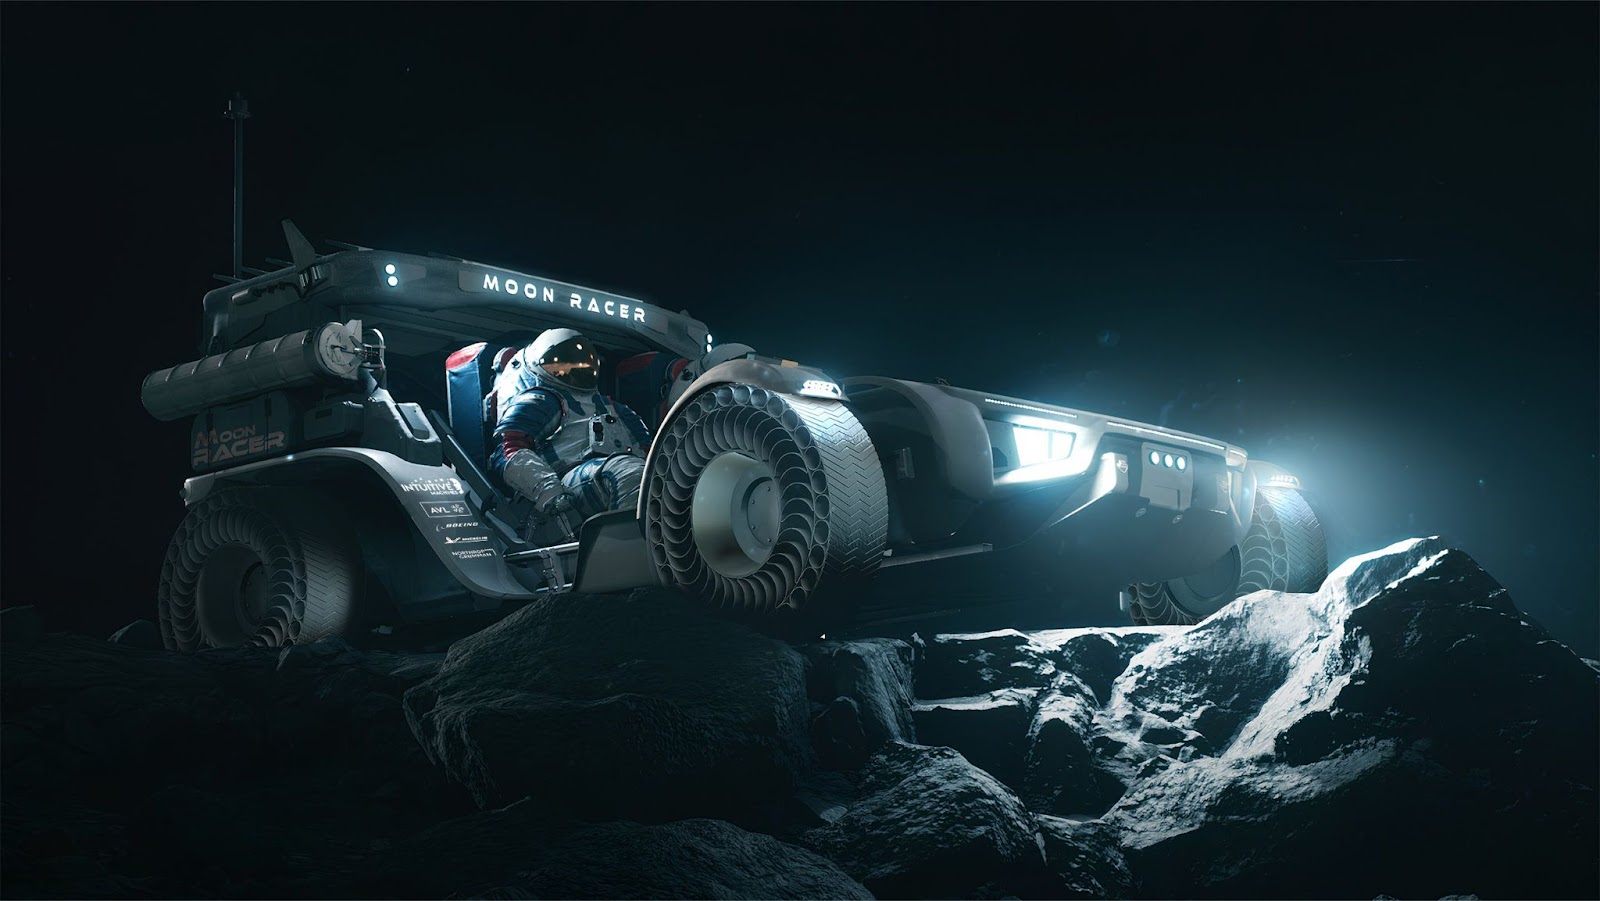 Astronaut driving a futuristic moon rover over rocky lunar terrain at night, illuminated by the vehicle's headlights.